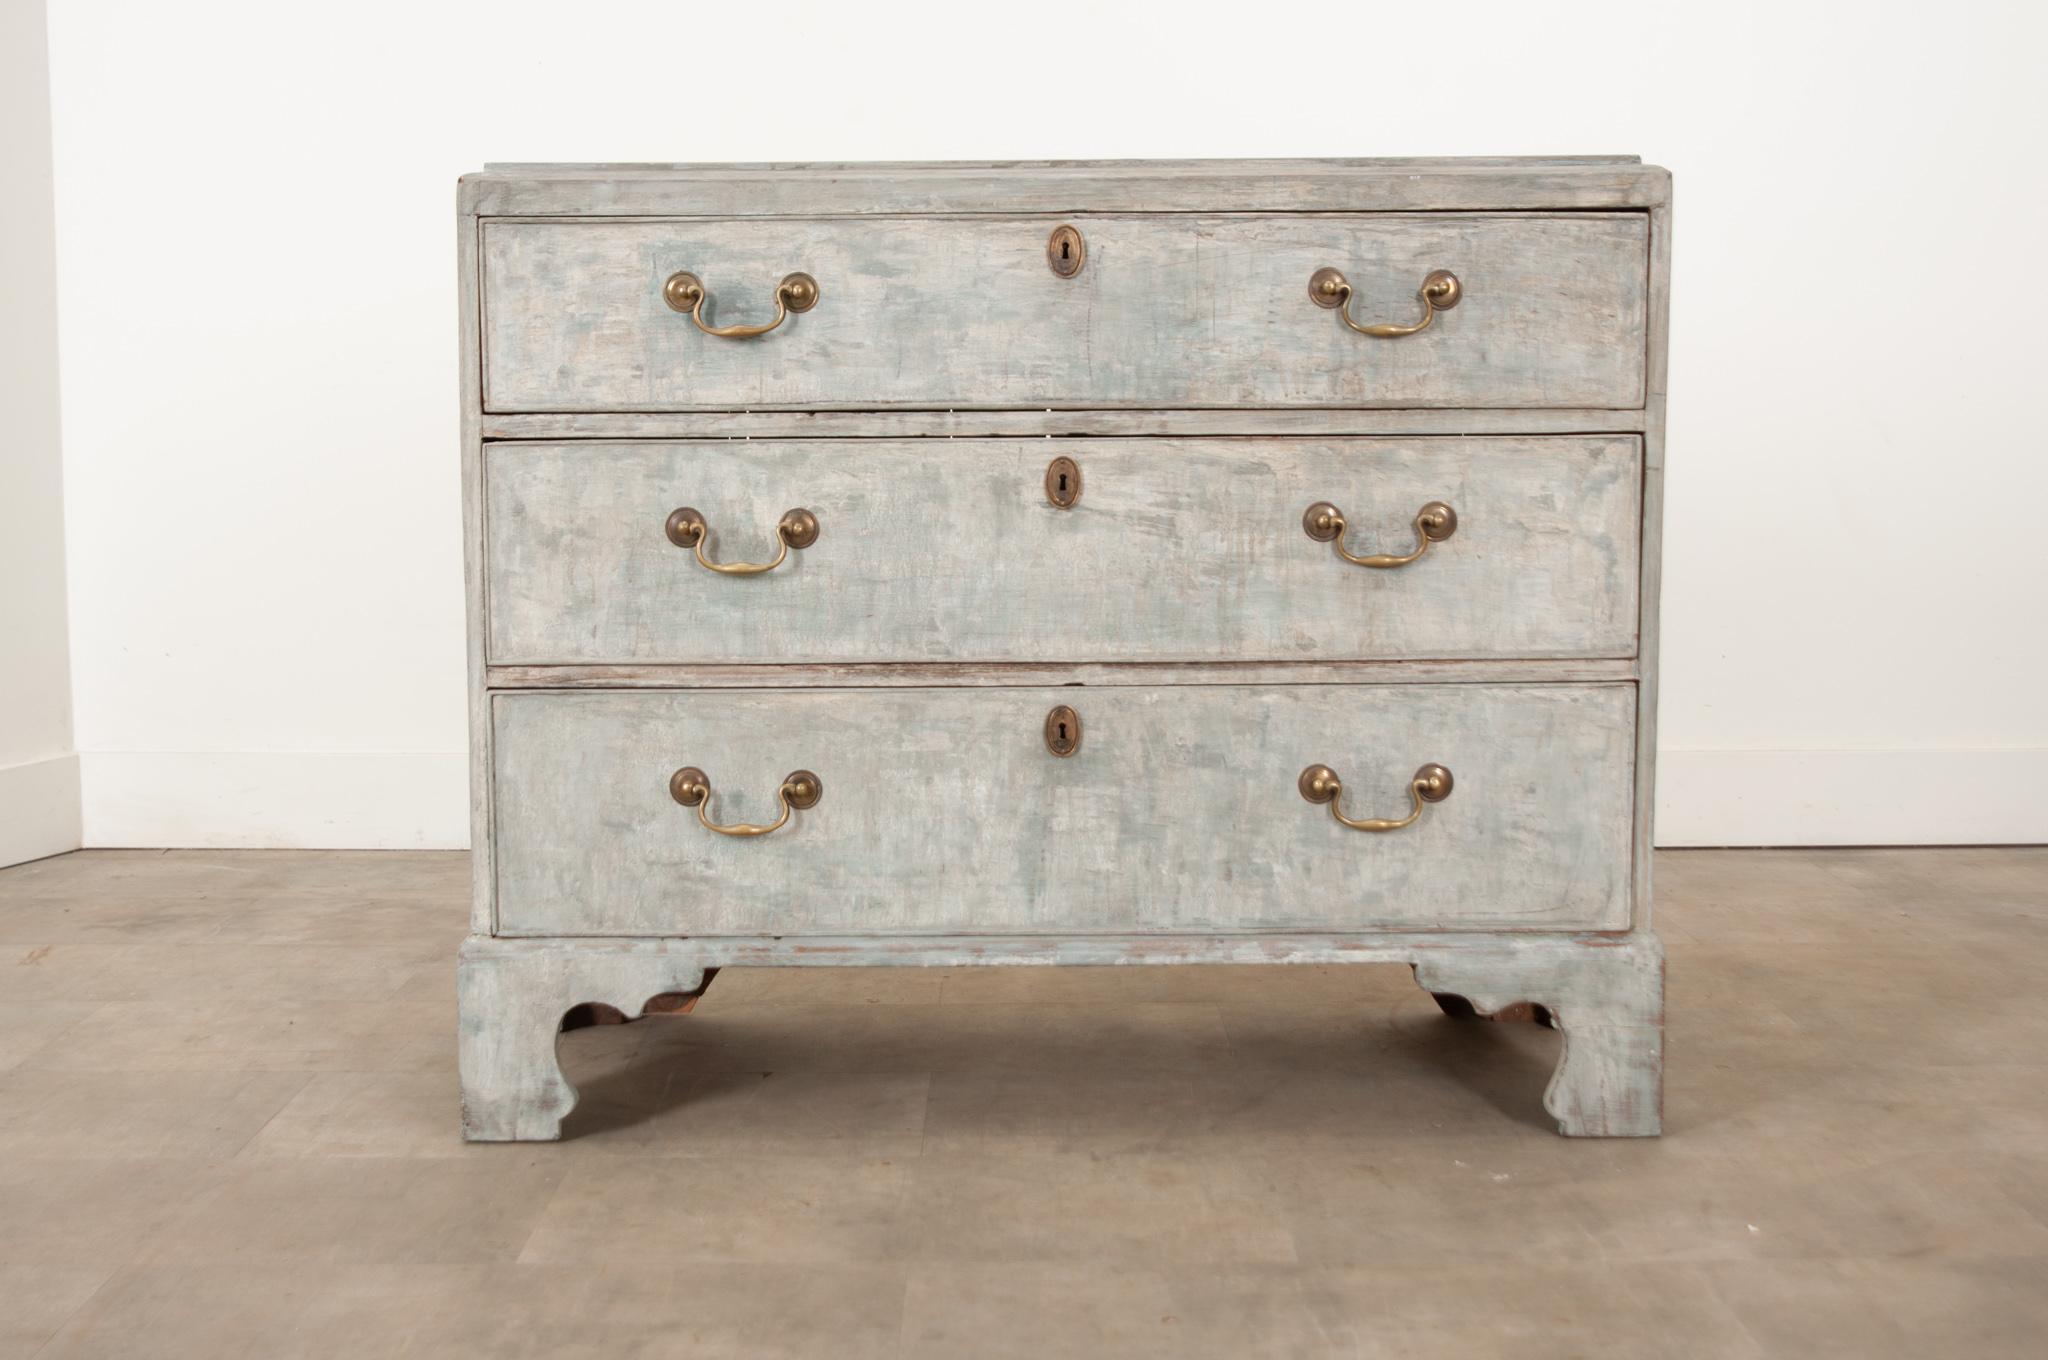 A streamlined profile and stylish bracket legs make this 19th century British stripped and painted commode a standout. This recently painted case piece has smooth plain  top with a deep molded edge above three large drawers with oval escutcheon